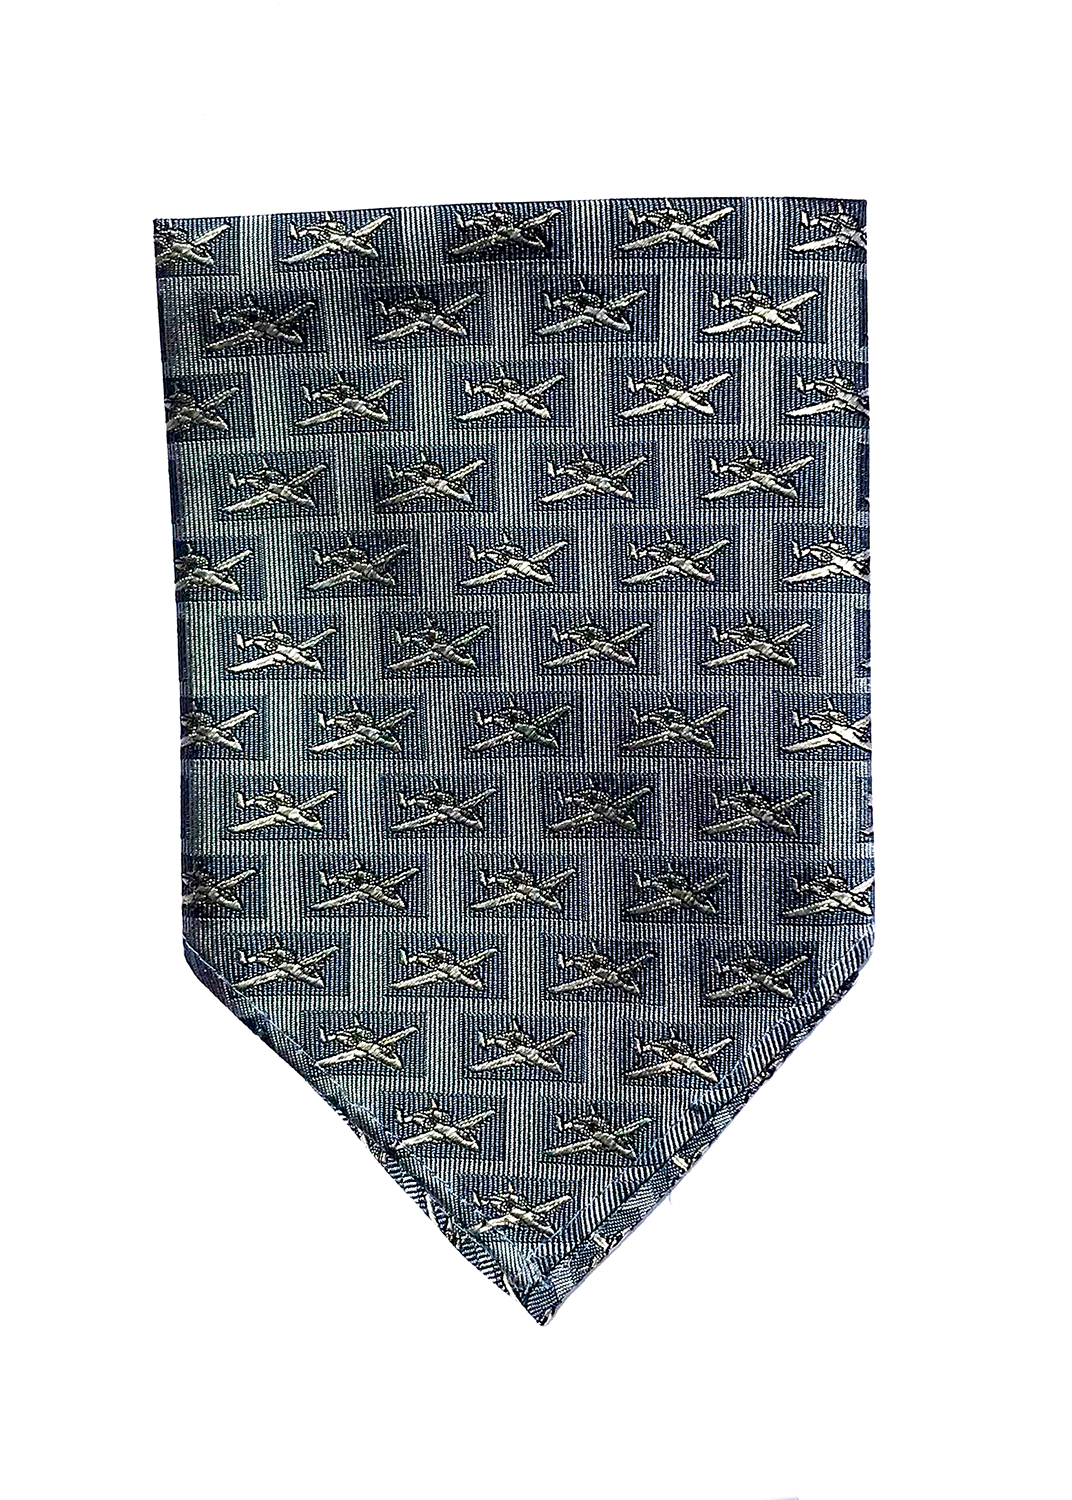 A-10 Thunderbolt pocket square in grey and blue